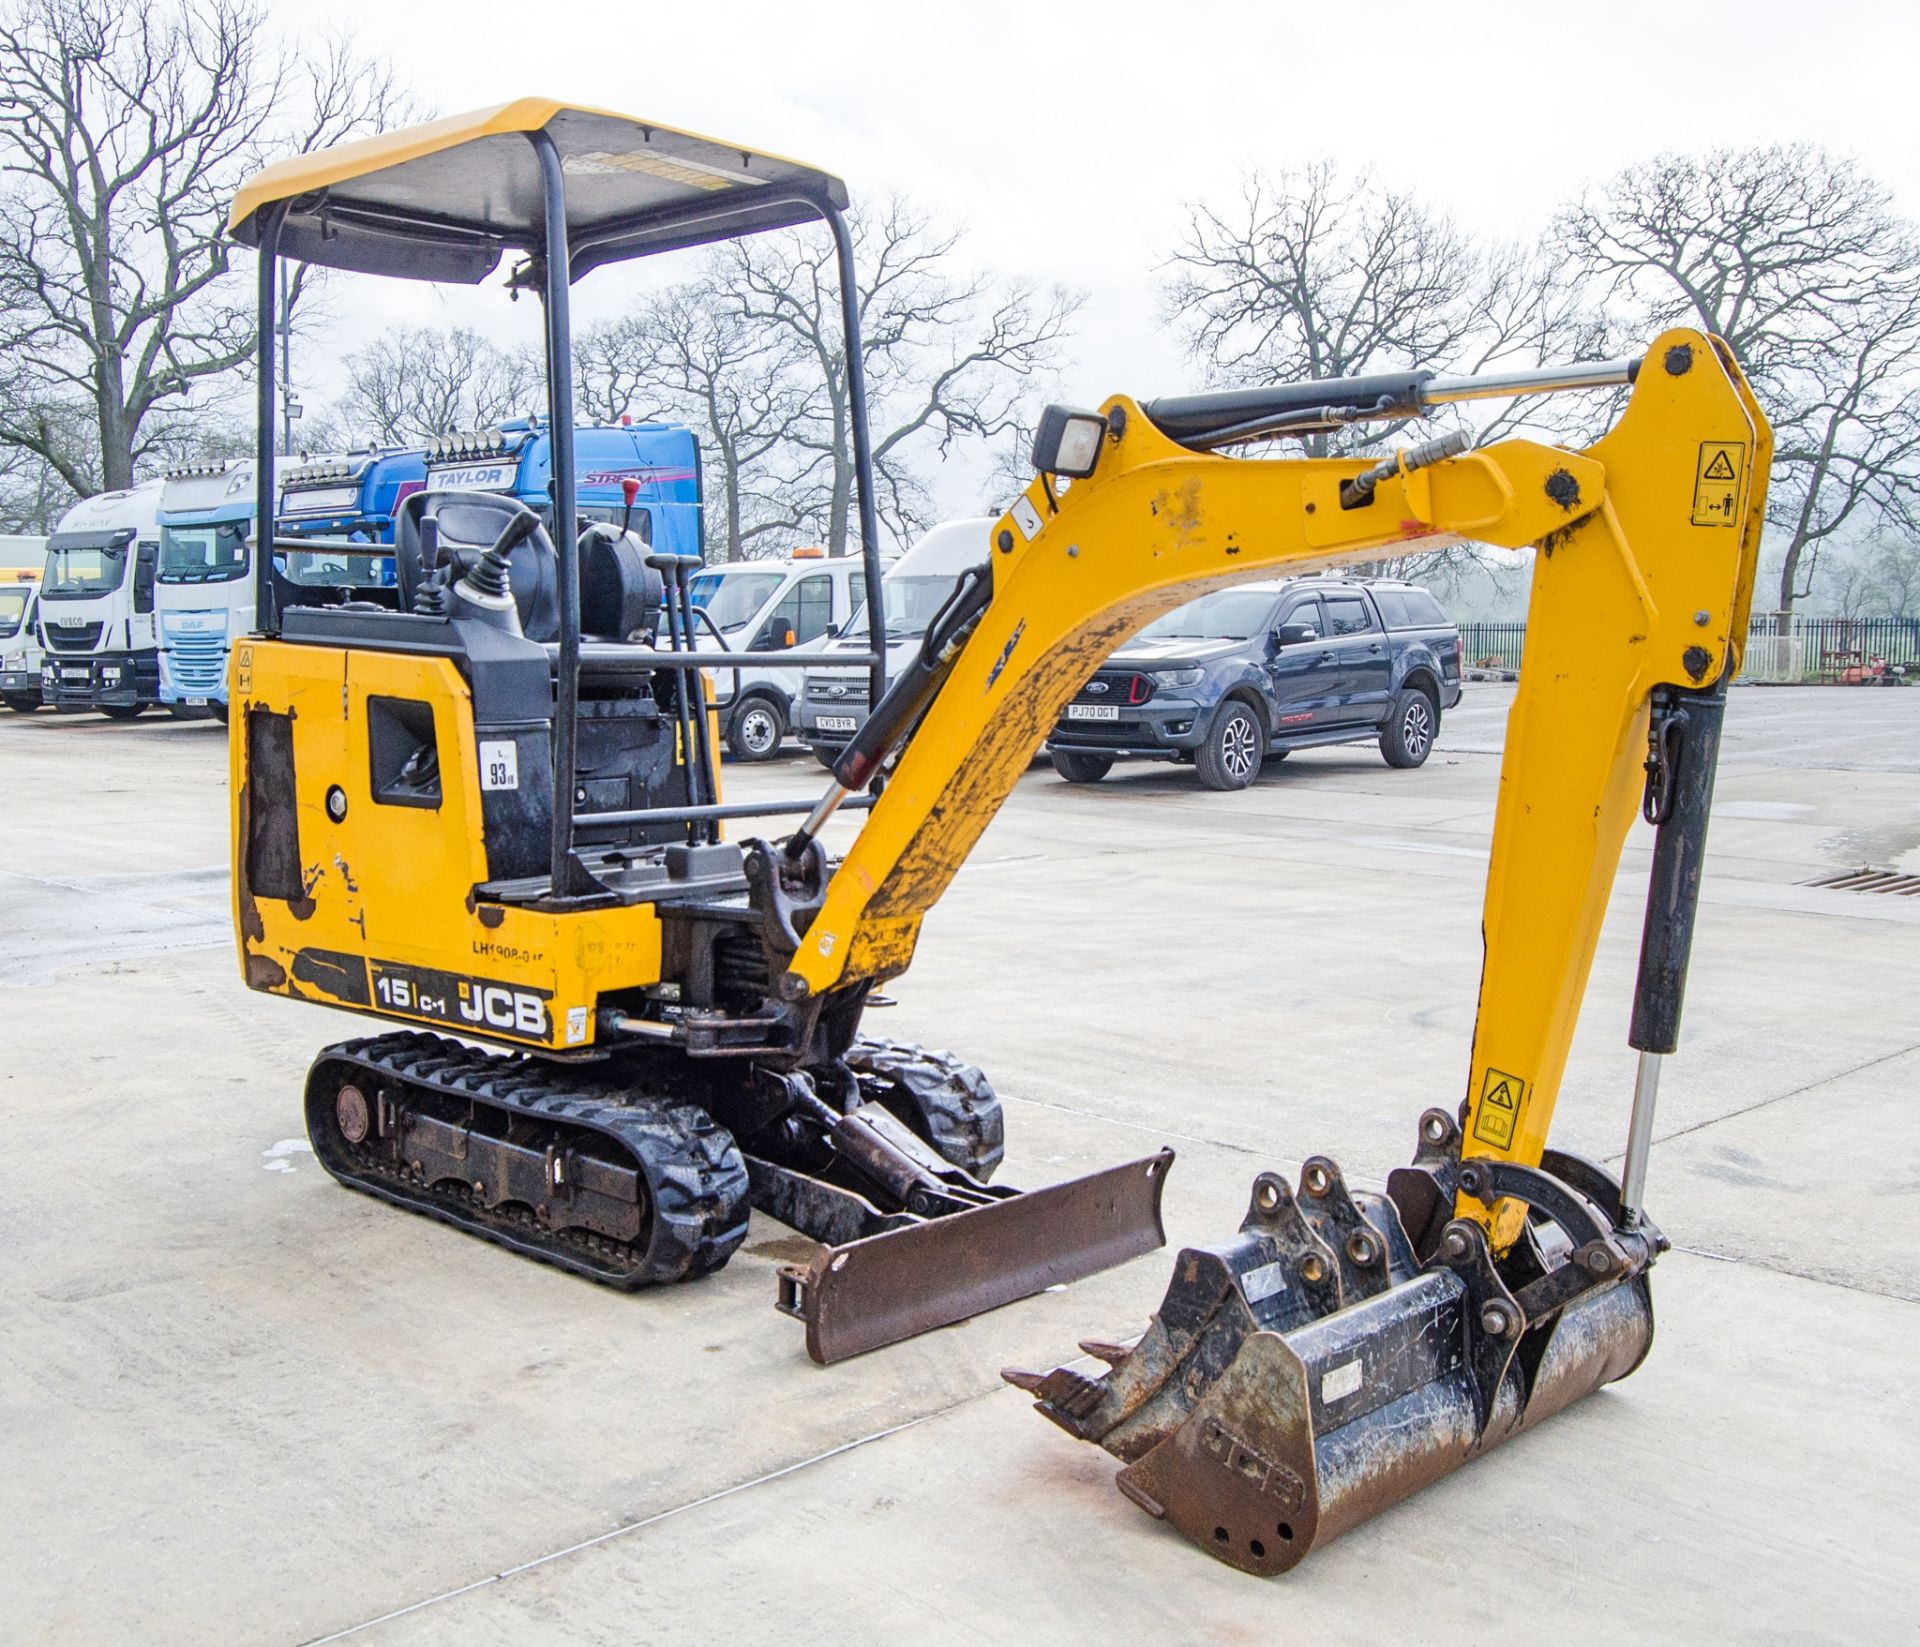 JCB 15C-1 1.5 tonne rubber tracked mini excavator Year: 2019 S/N: 2710395 Recorded Hours: 1300 - Image 2 of 24